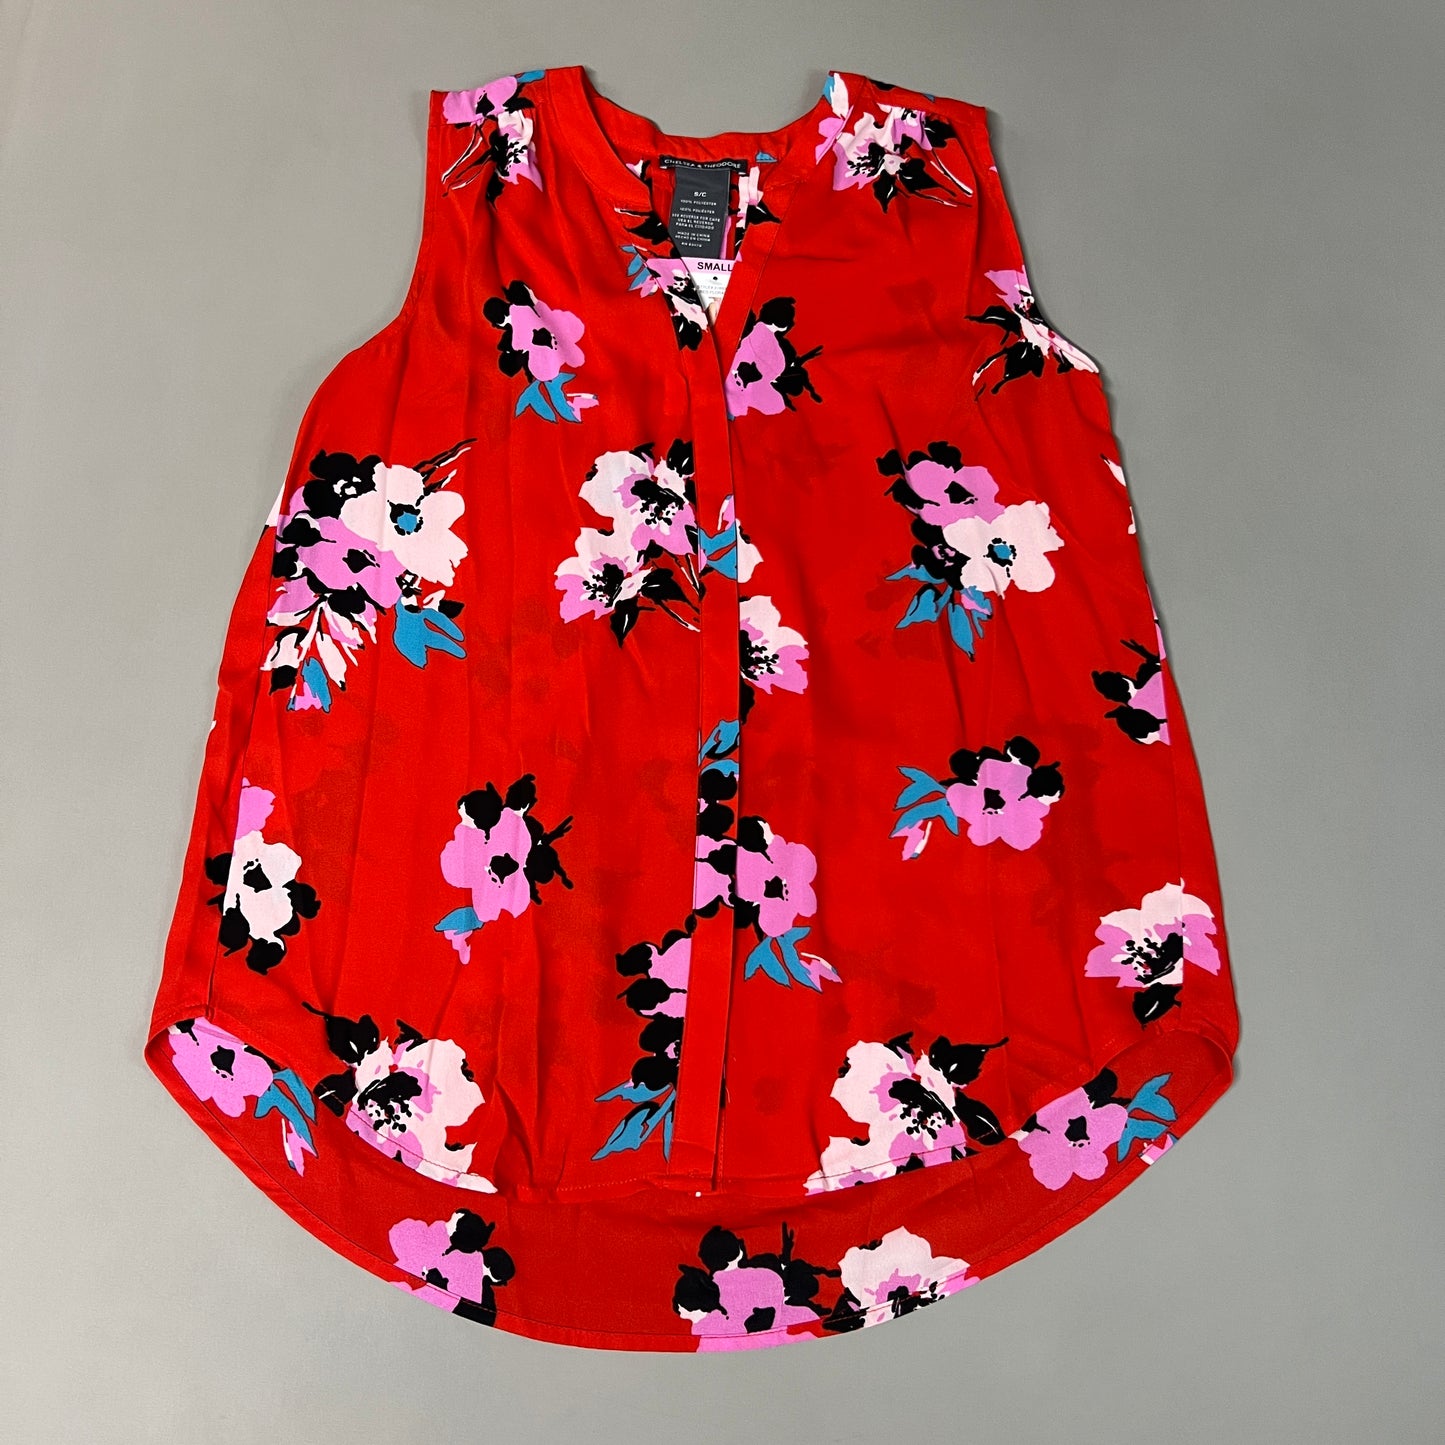 CHELSEA & THEODORE Sleeveless Blouse Women's Size S Red Floral Paisley 2165072 (NEW)